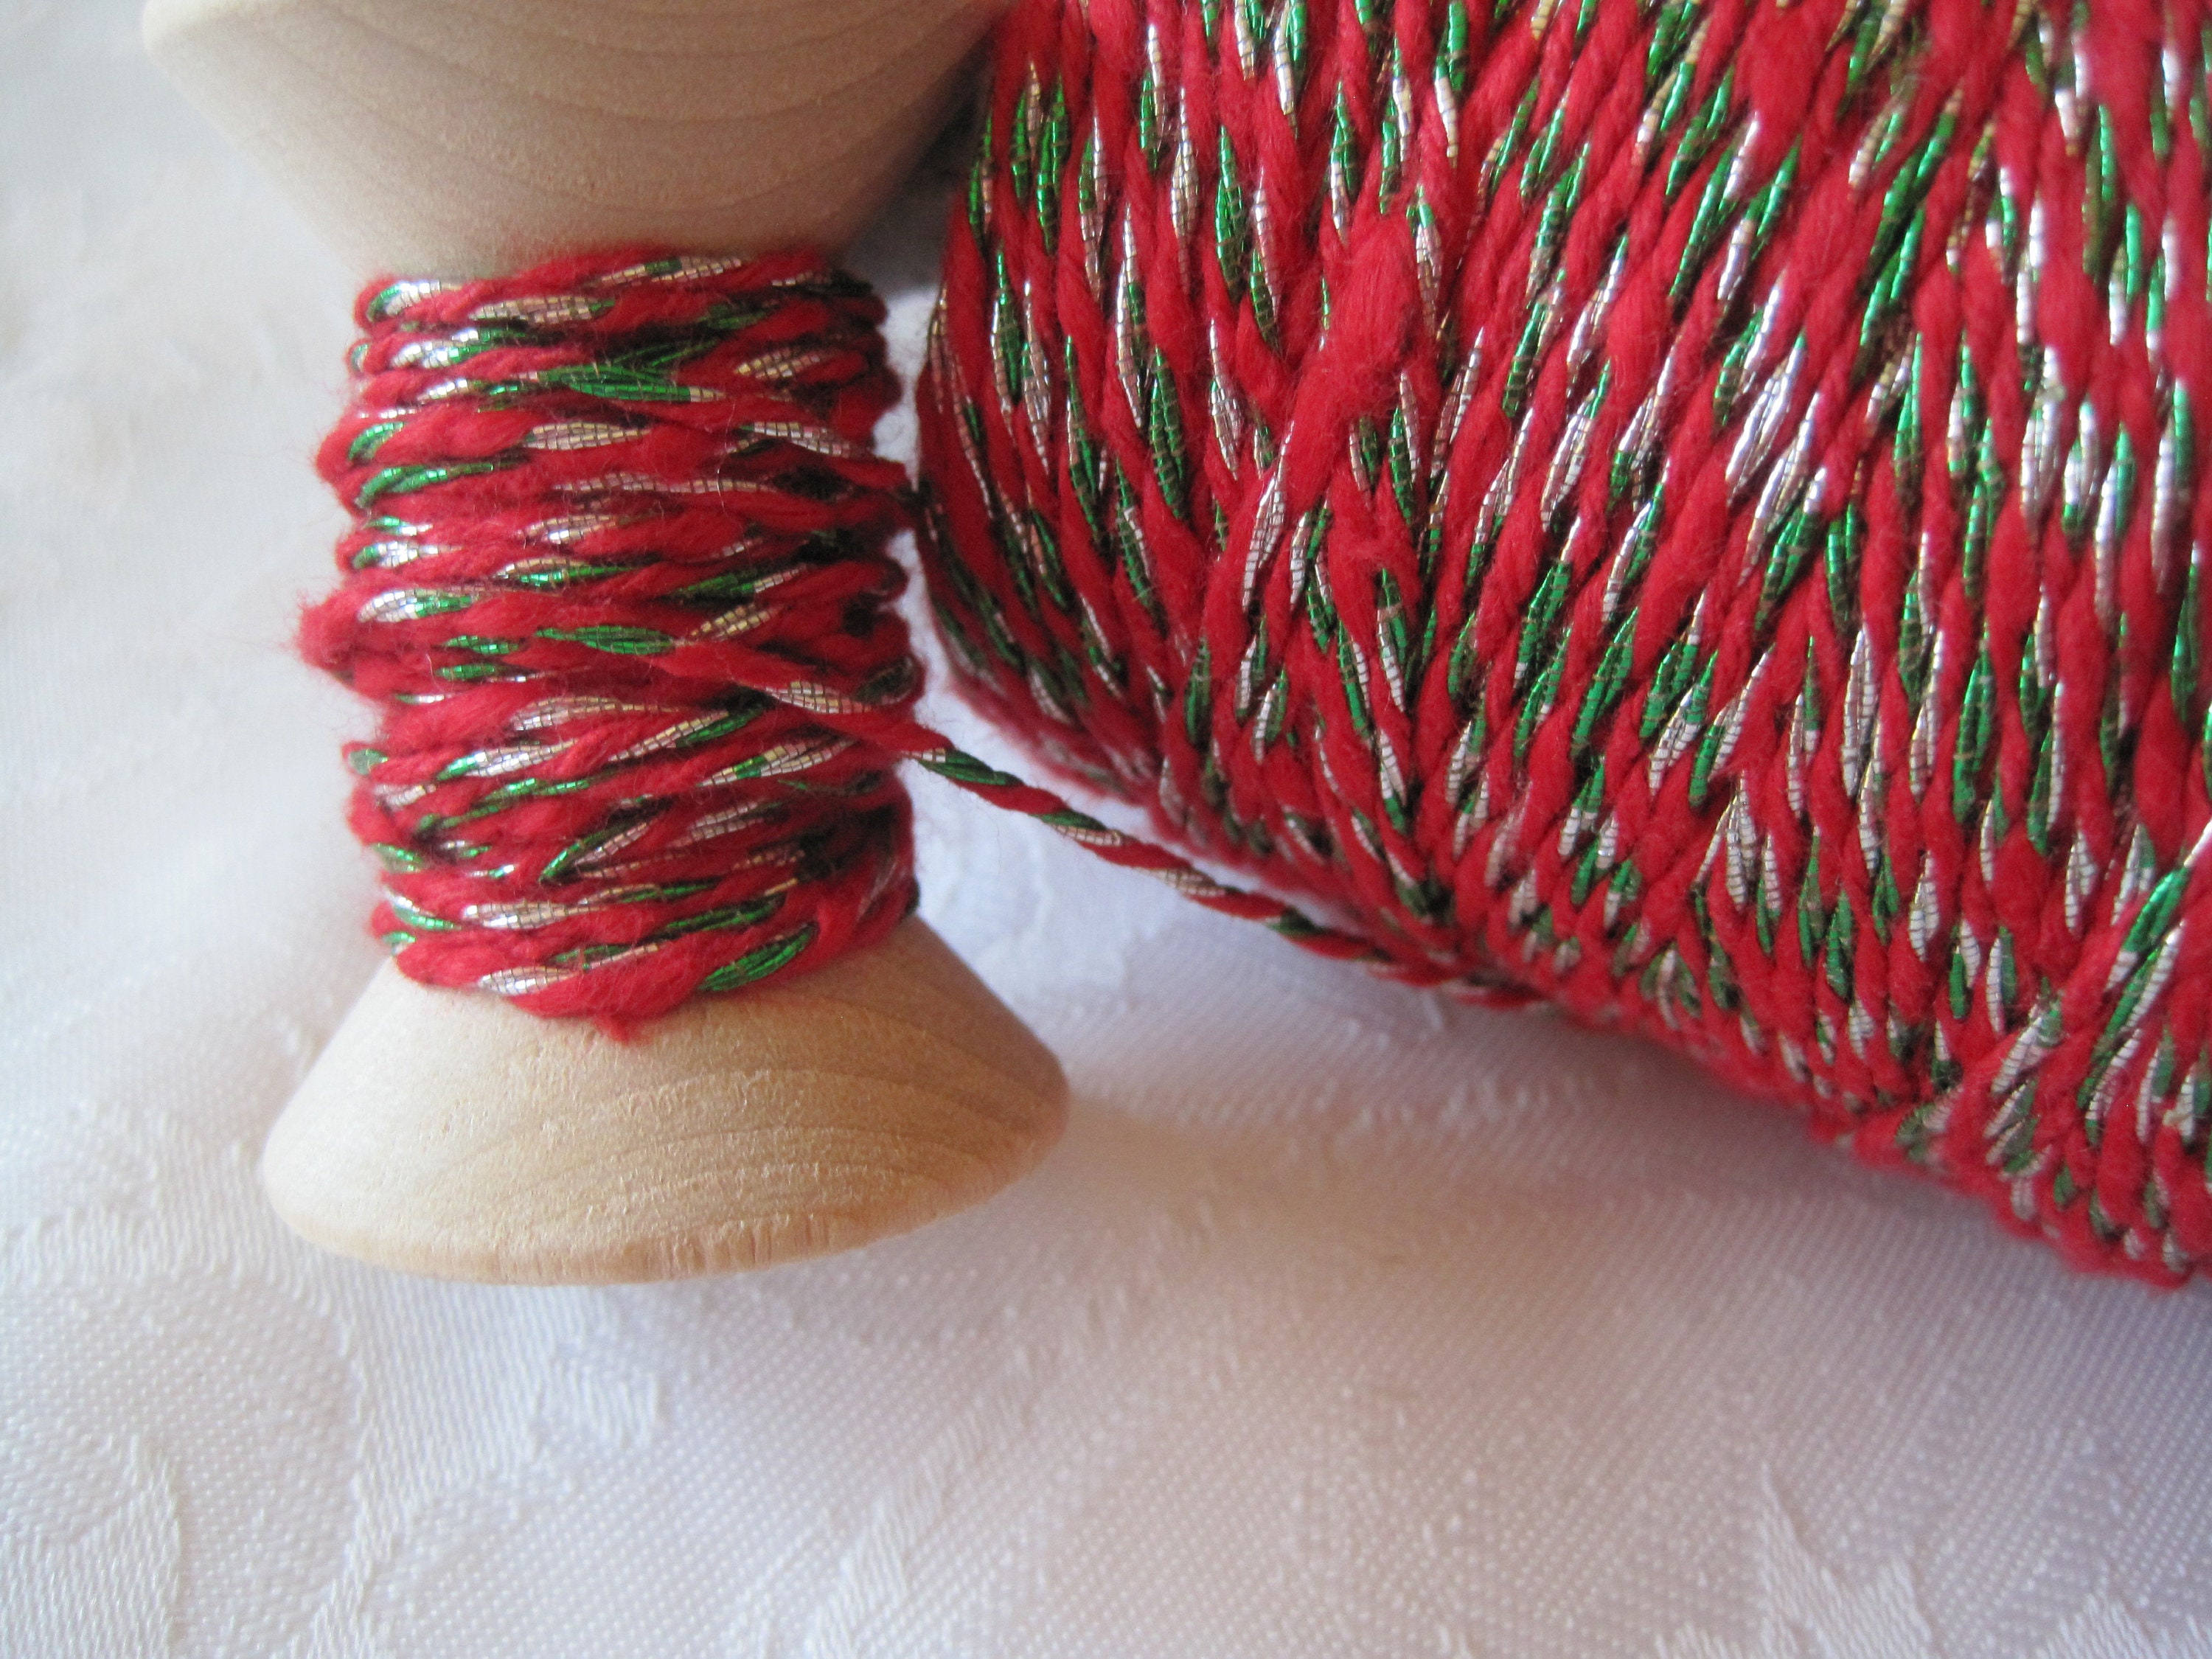 Red Jute, Red String, Red Twine, Colored String, Christmas Holiday